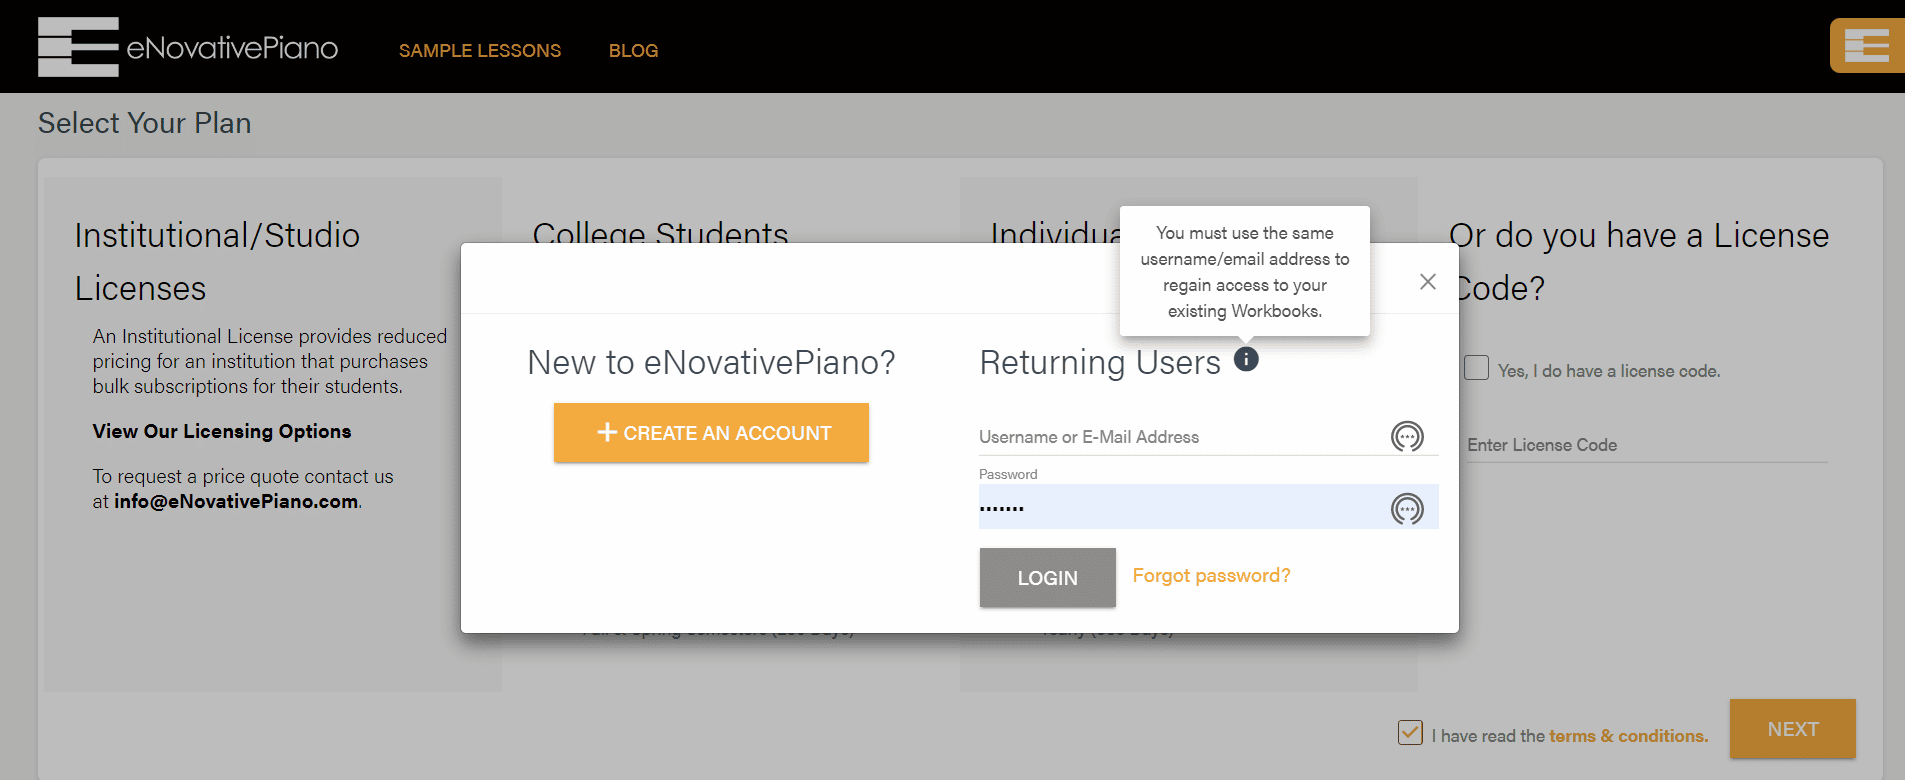 image showing login screen for returning users